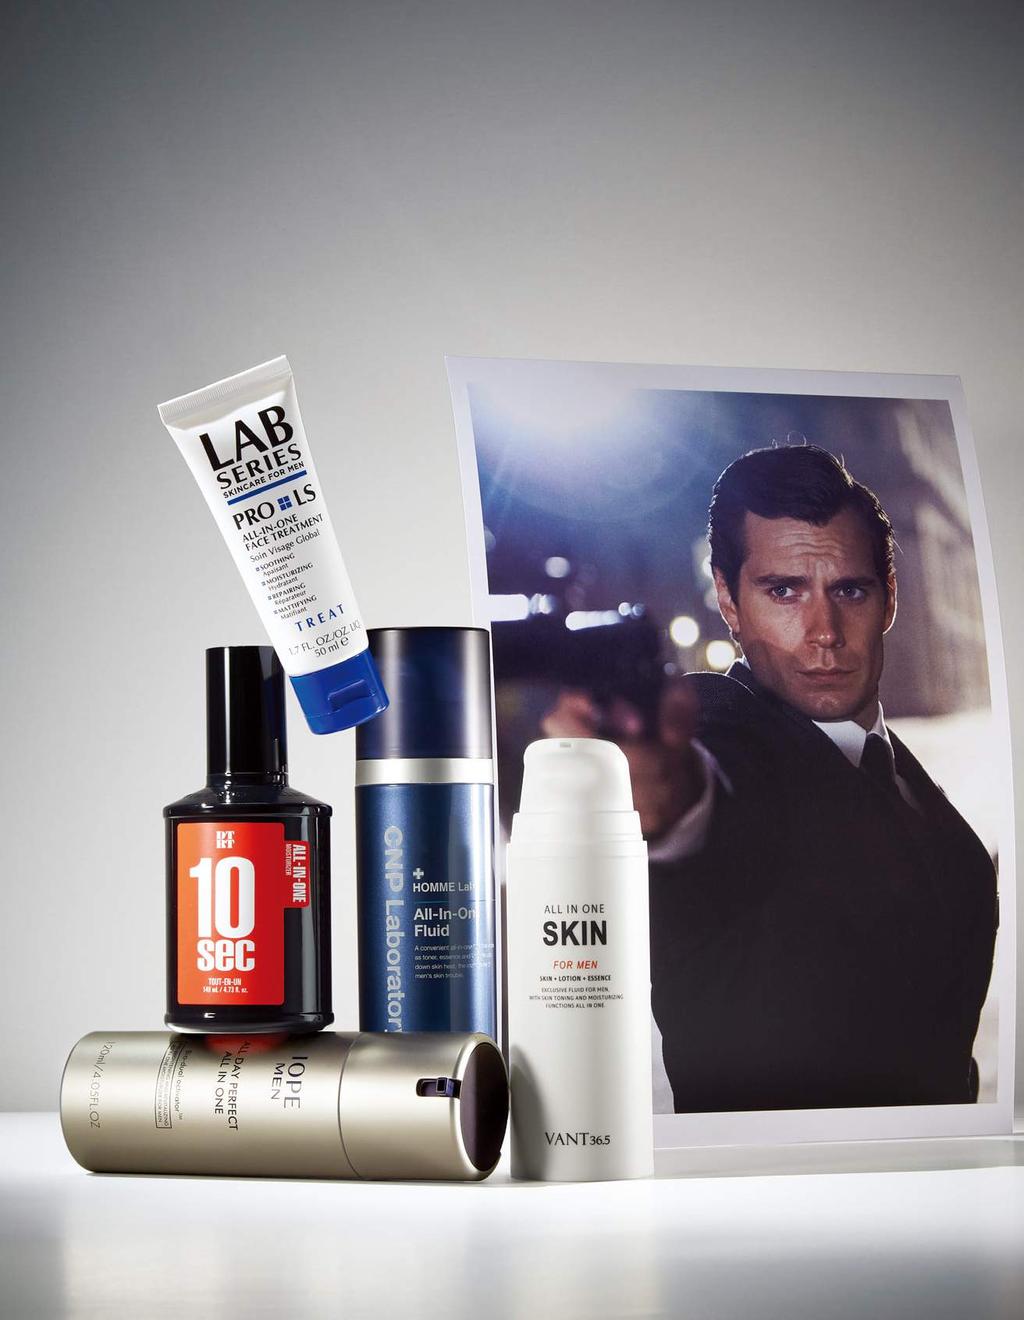 Renewal 140ml $26 DR.JART+ 03 All Day Perfect All-In-One 120ml $30 IOPE MEN 04 All-in-One Fluid 110ml price on request CNP 05 All-in-One Skin For Men 120ml $29 VANT 36.5 맑고깨끗한피부는남녀모두에게호감을준다.